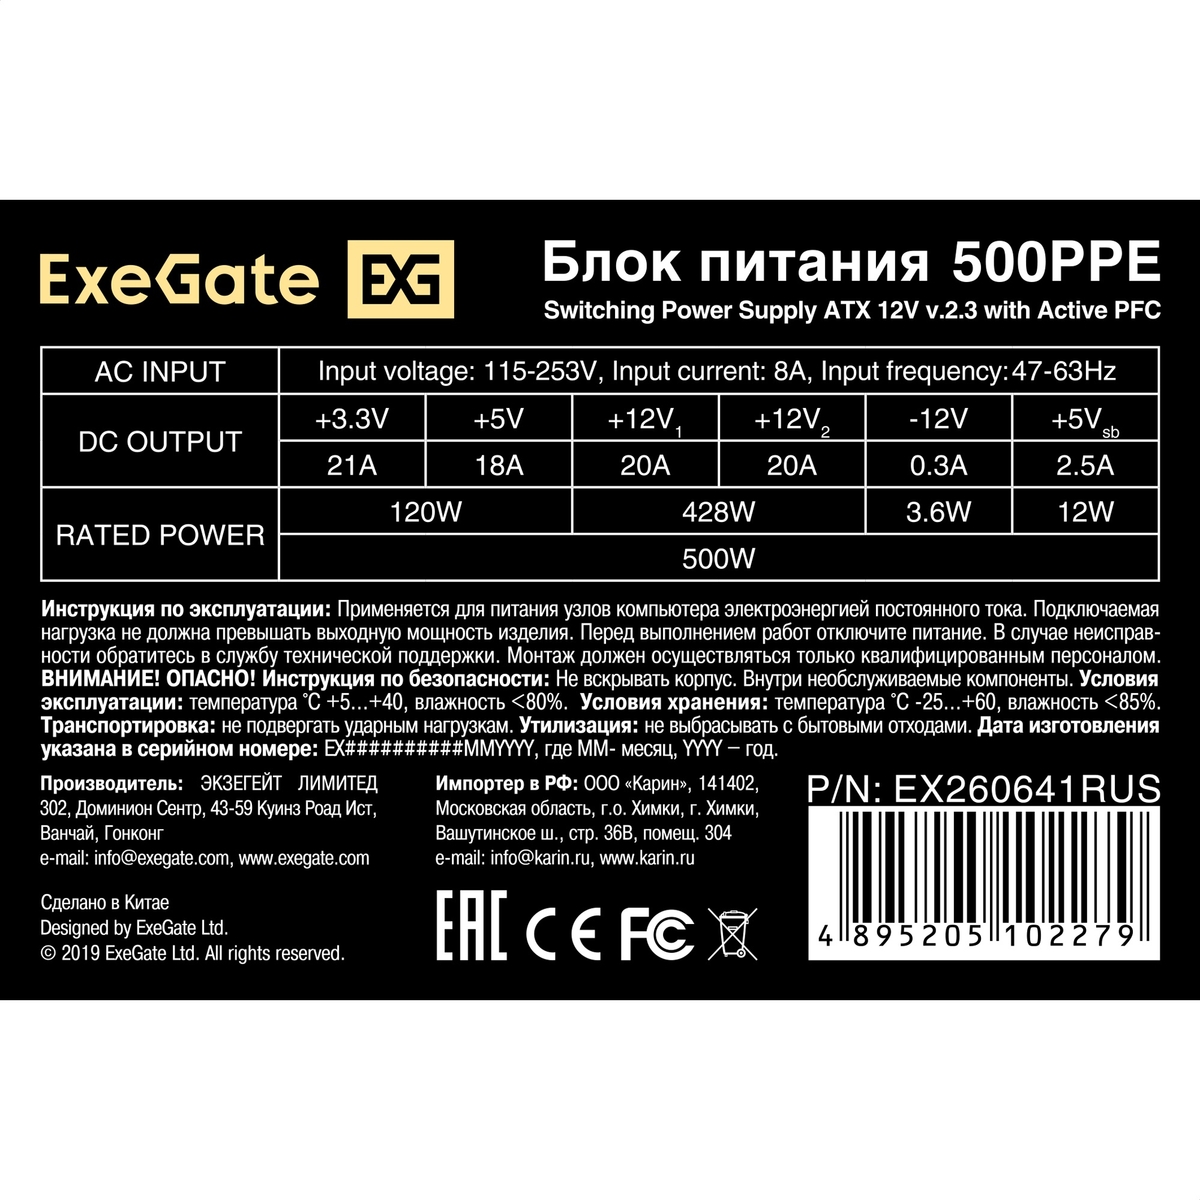  500W ExeGate 500PPE